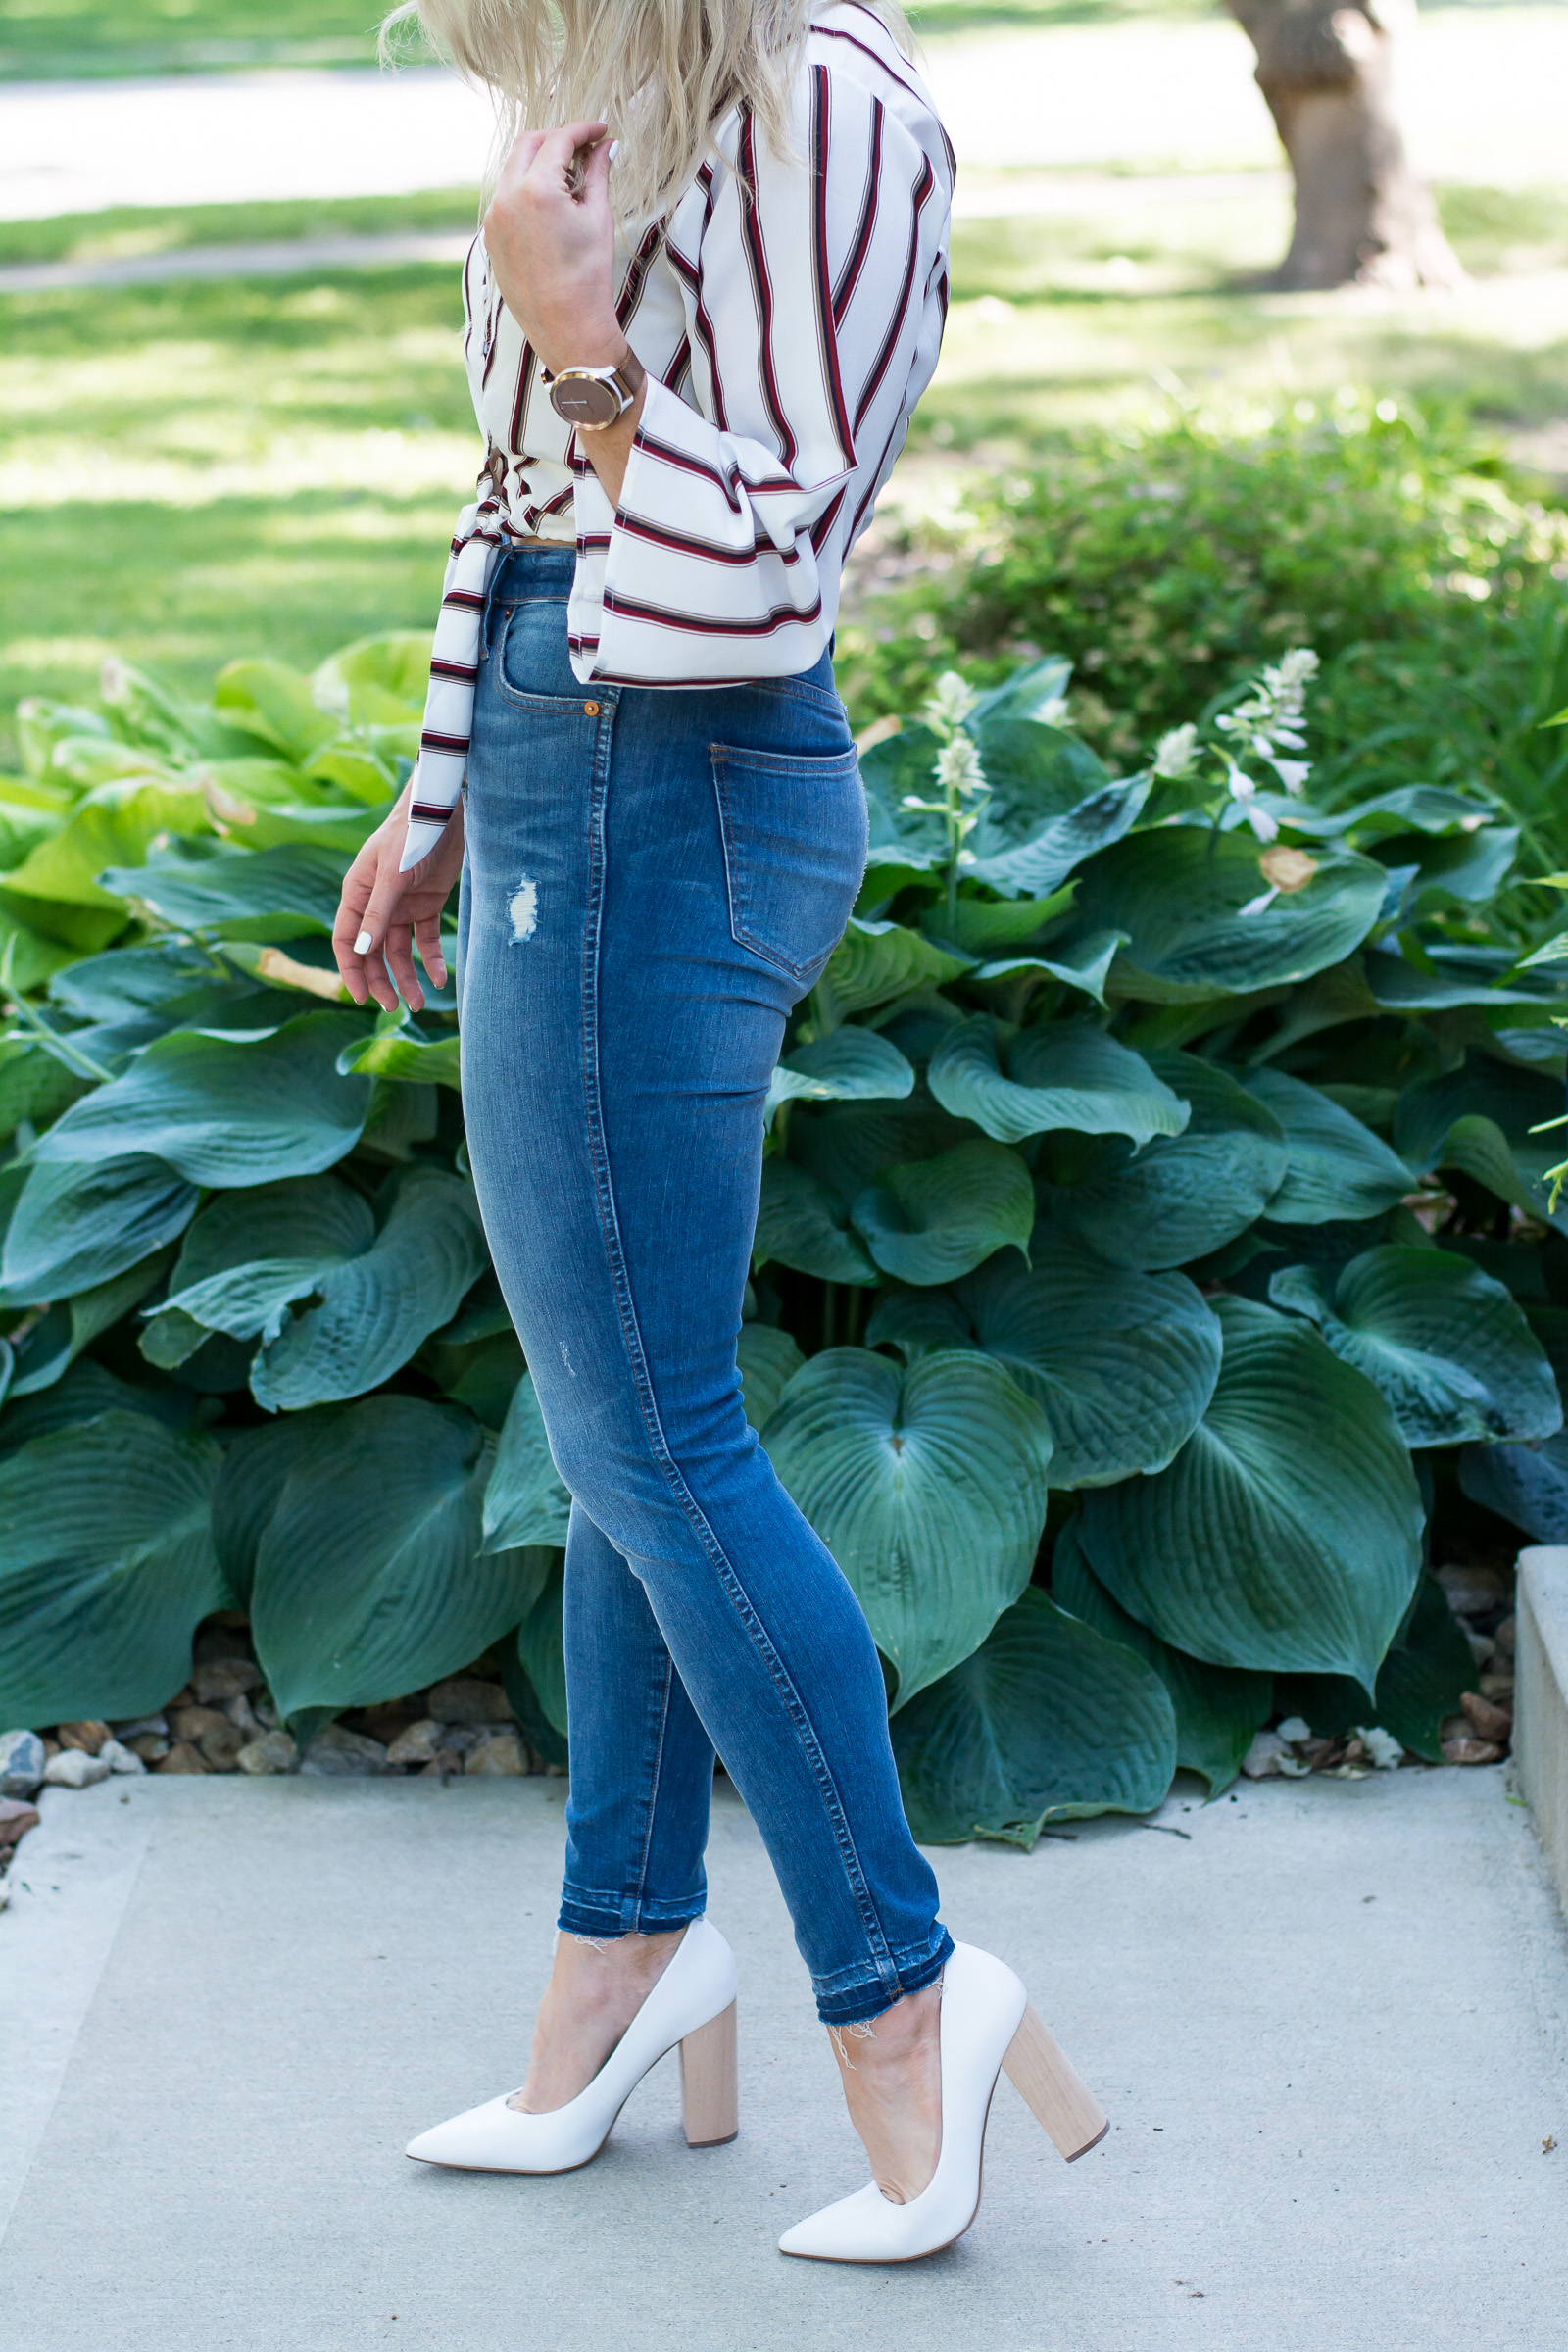 Crop Top with Super High-waisted Madewell Denim. | Ashley from LSR